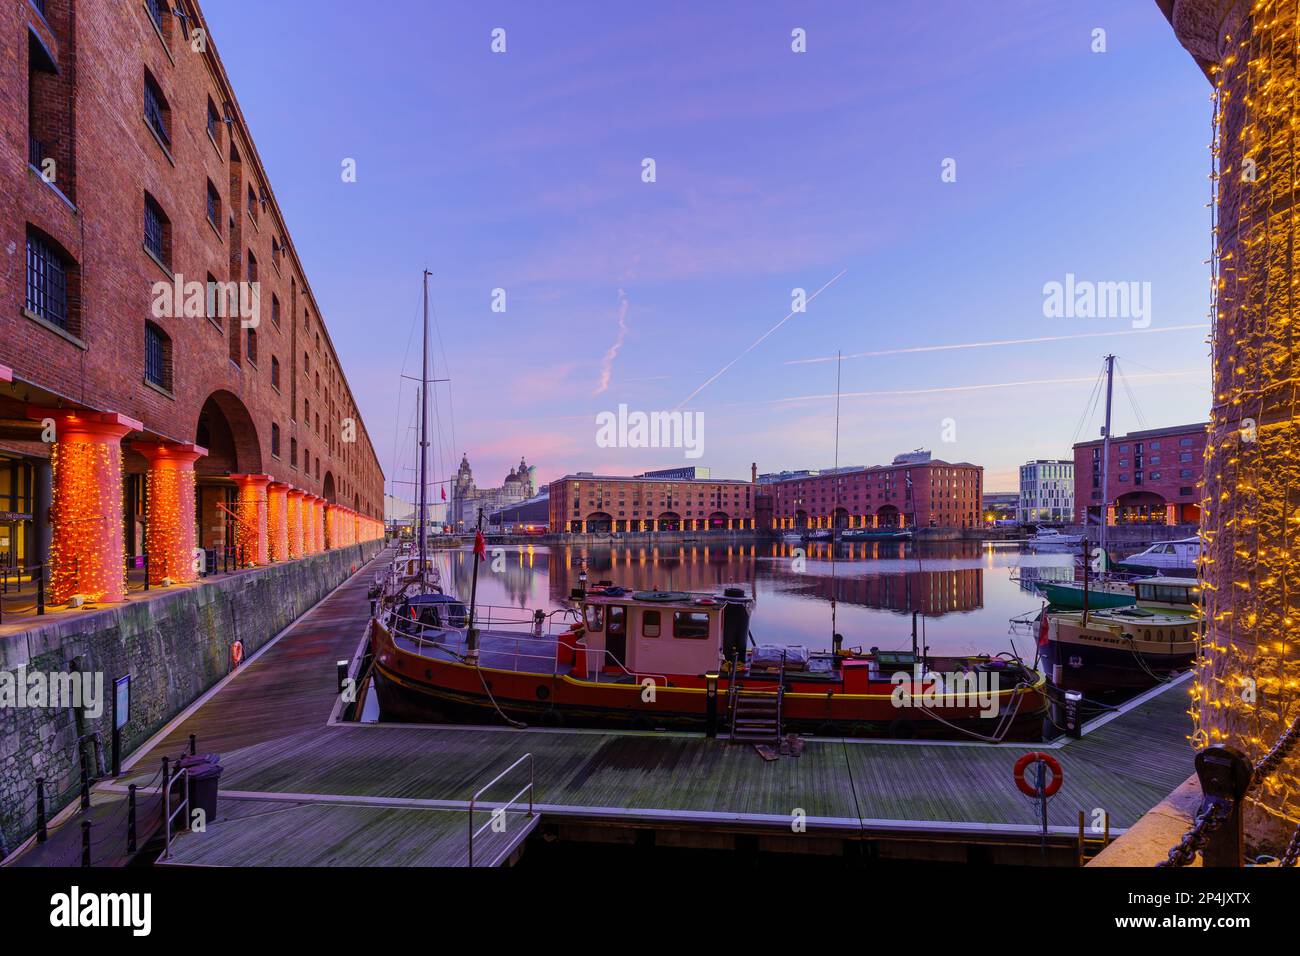 Liverpool, UK - October 09, 2022: Sunrise view of the Royal Albert Dock, with various buildings, in Liverpool, Merseyside, England, UK Stock Photo